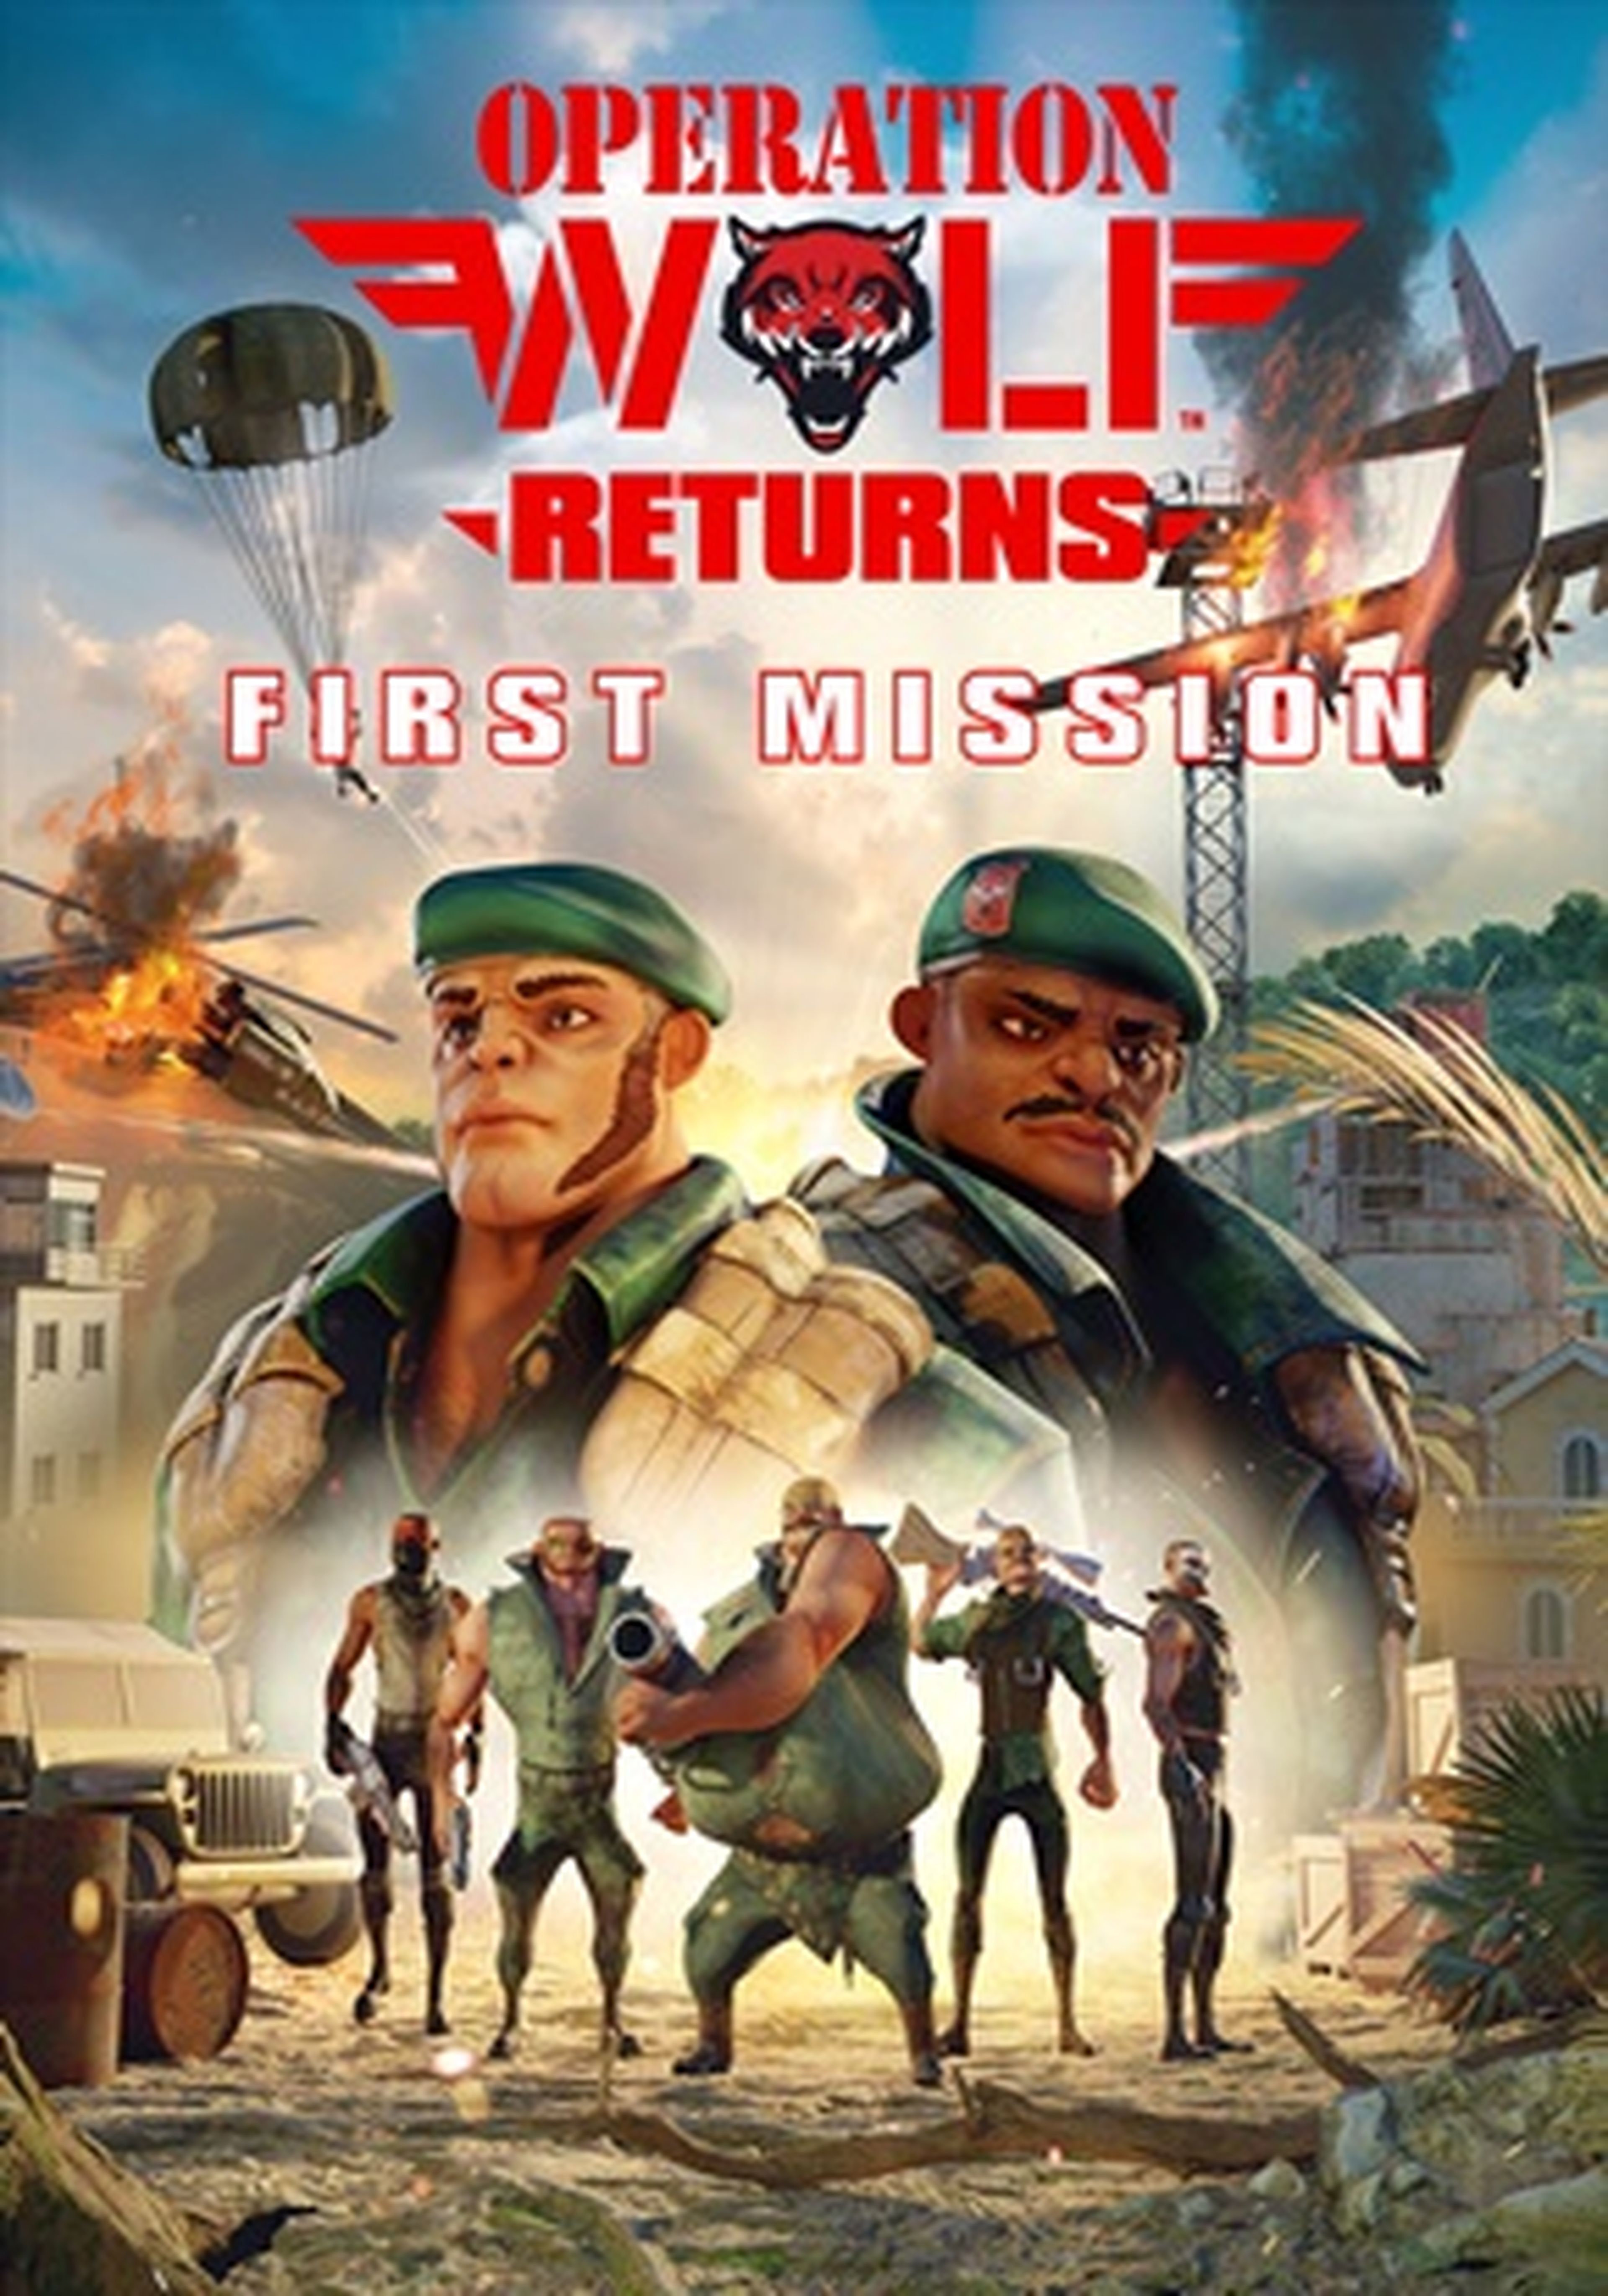 Operation Wolf Returns: First Mission cartel